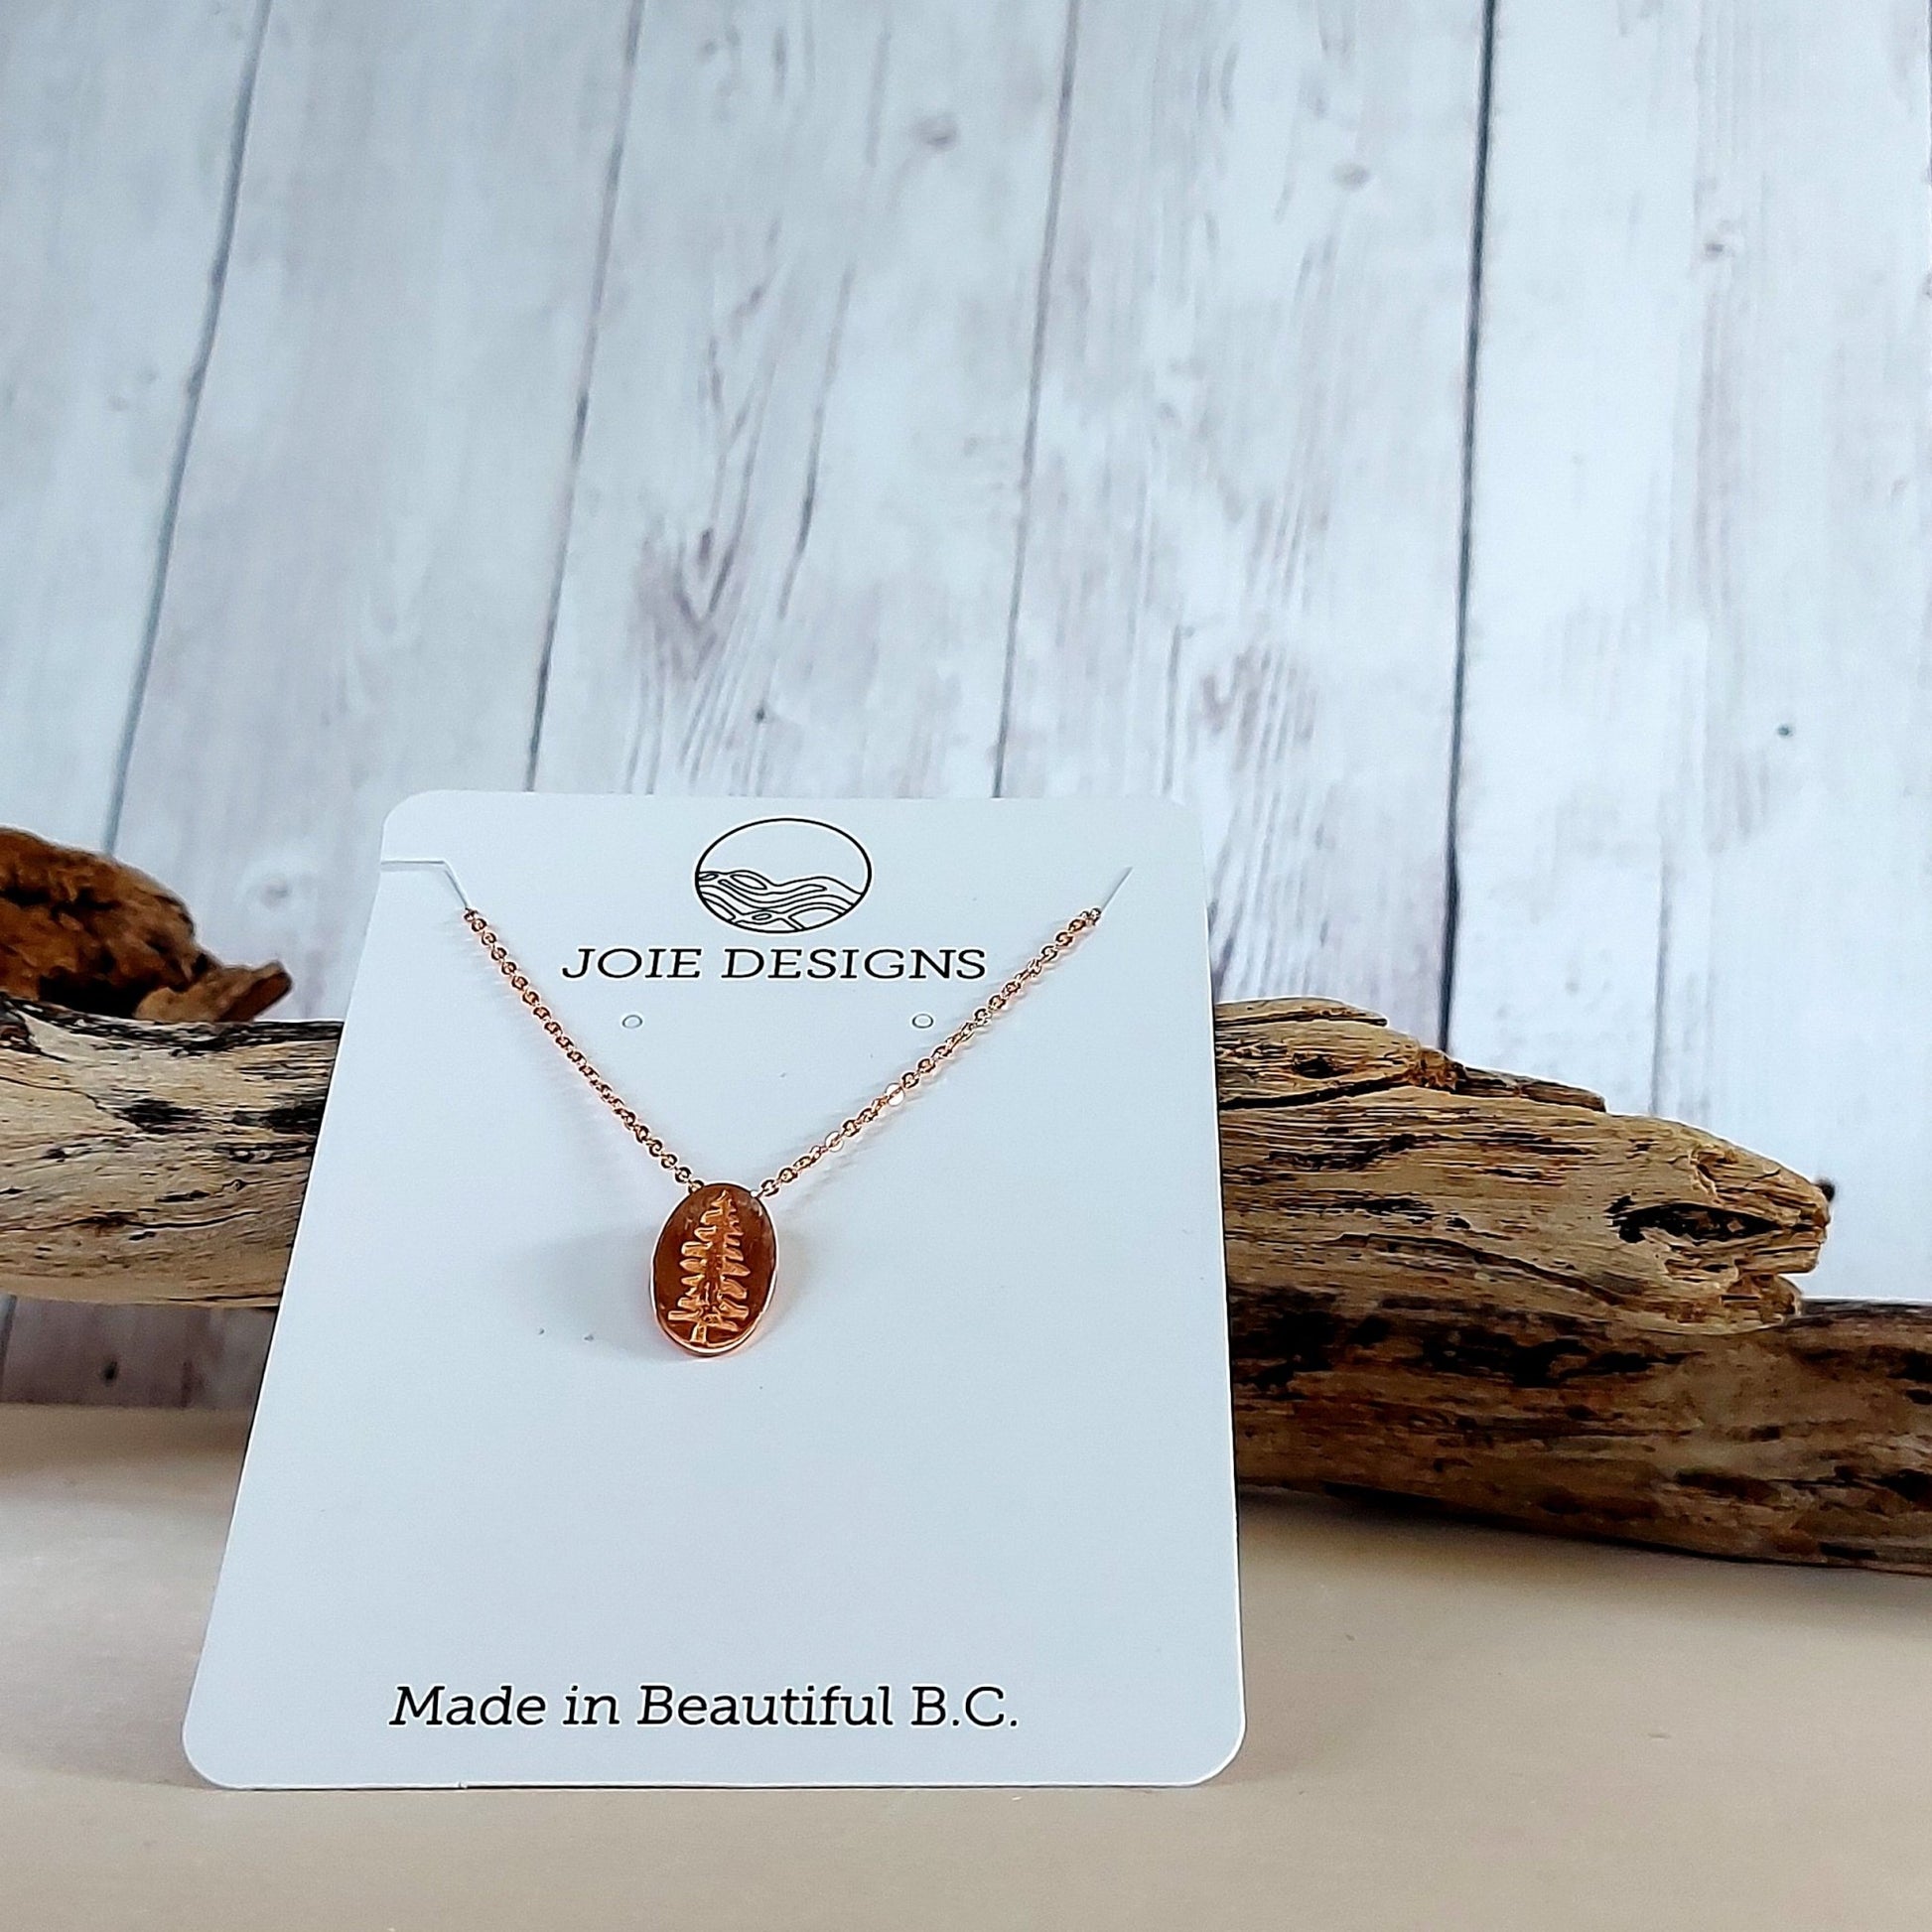 18k rose gold plated Sitka Tree Oval Dangle showcased on a jewelry card with wooden piece in background